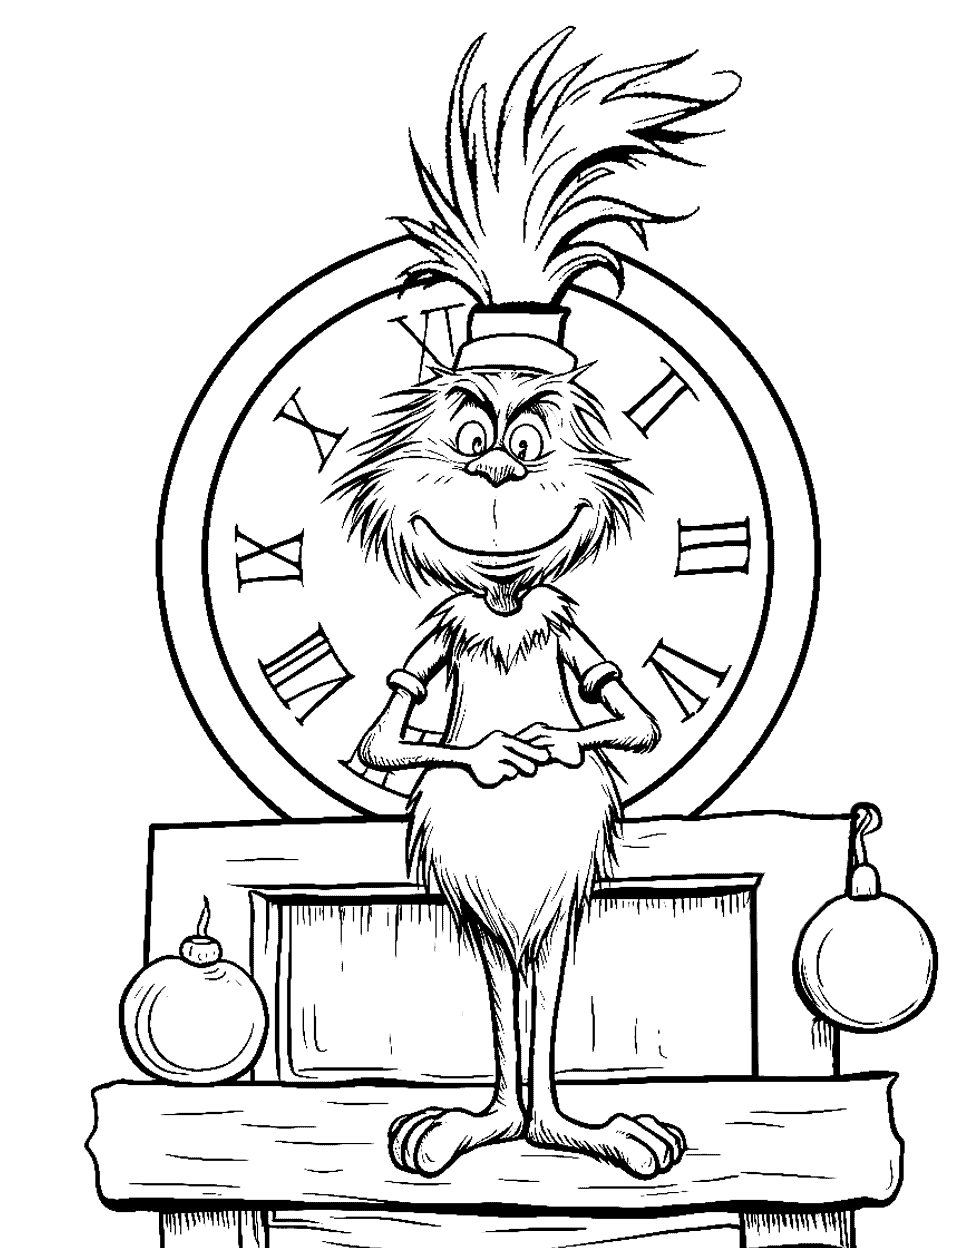 Christmas Eve Anticipation Coloring Page - The Grinch in front of a huge clock, waiting for Christmas Eve.